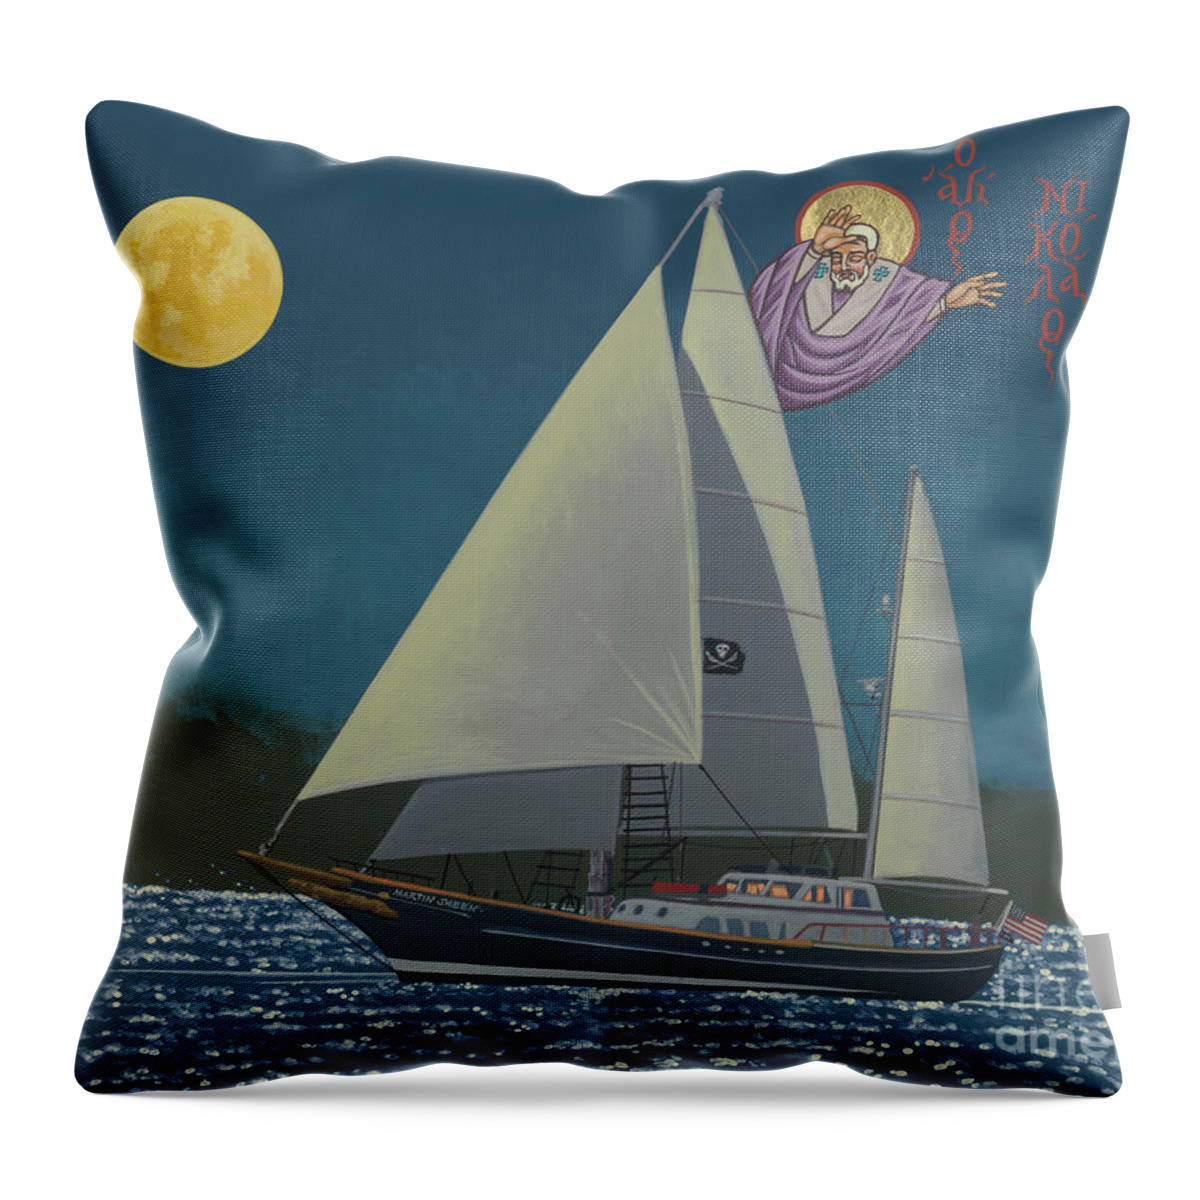 St Nicholas Patron Of Children Sailors And Sea Shepherds Throw Pillow featuring the painting St Nicholas Patron of Children, Sailors and Sea Shepherds- 296 by William Hart McNichols